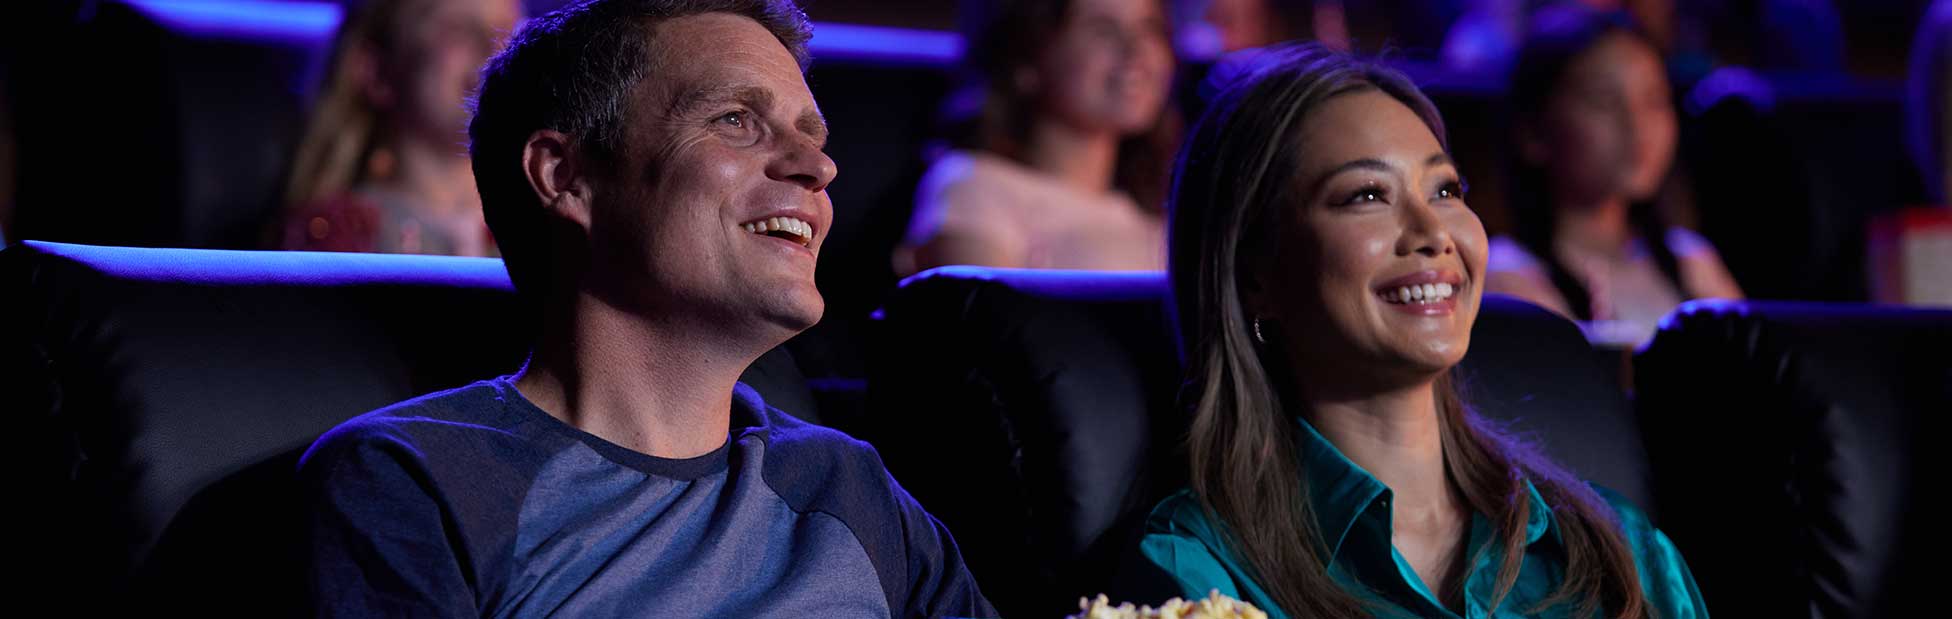 Young couple wearing glasses and eating popcorn looking up at the screen in the cinema smiling